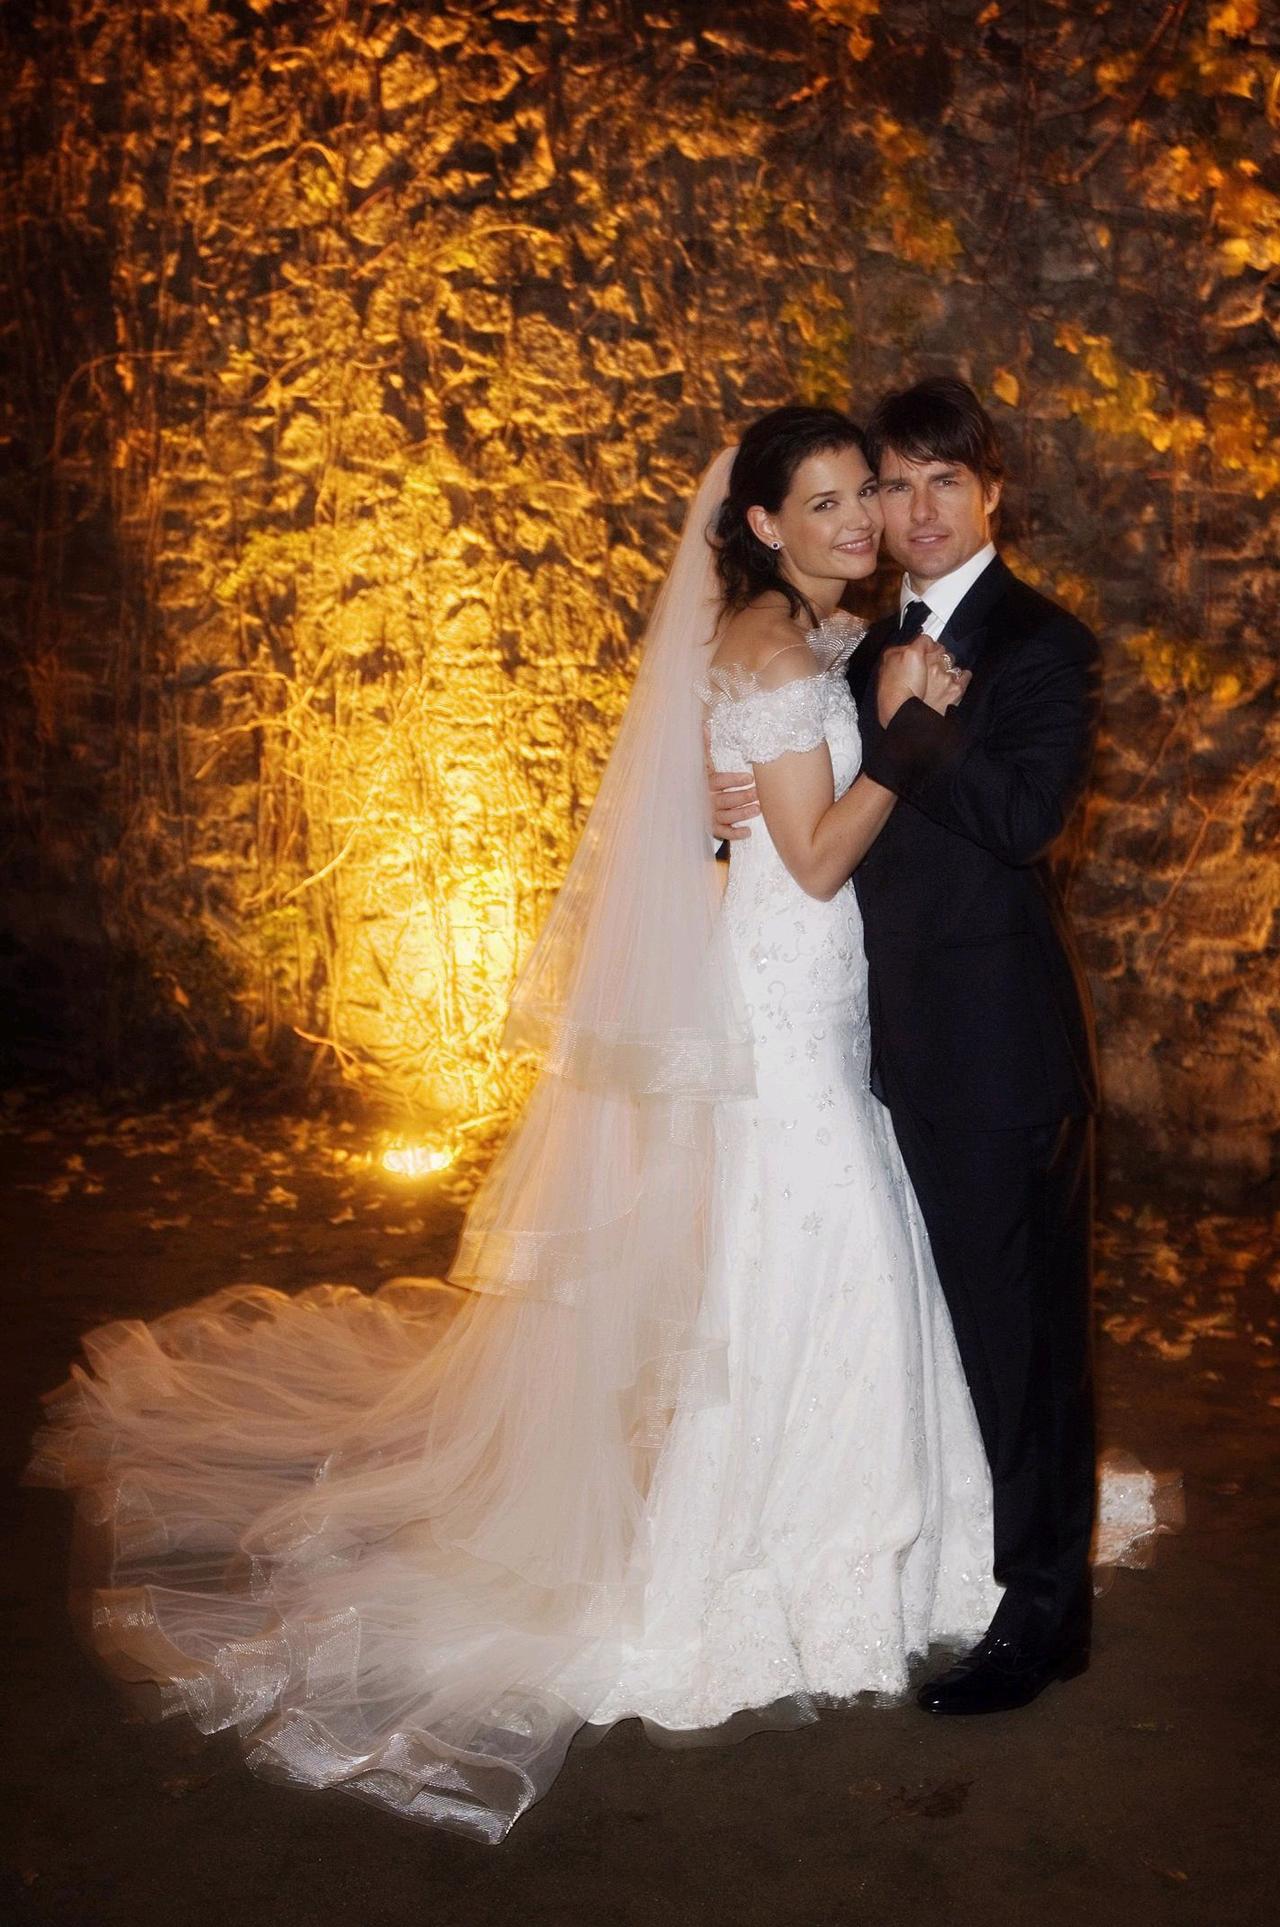 9 of the Most Expensive Celebrity Wedding Dresses Ever - Priciest